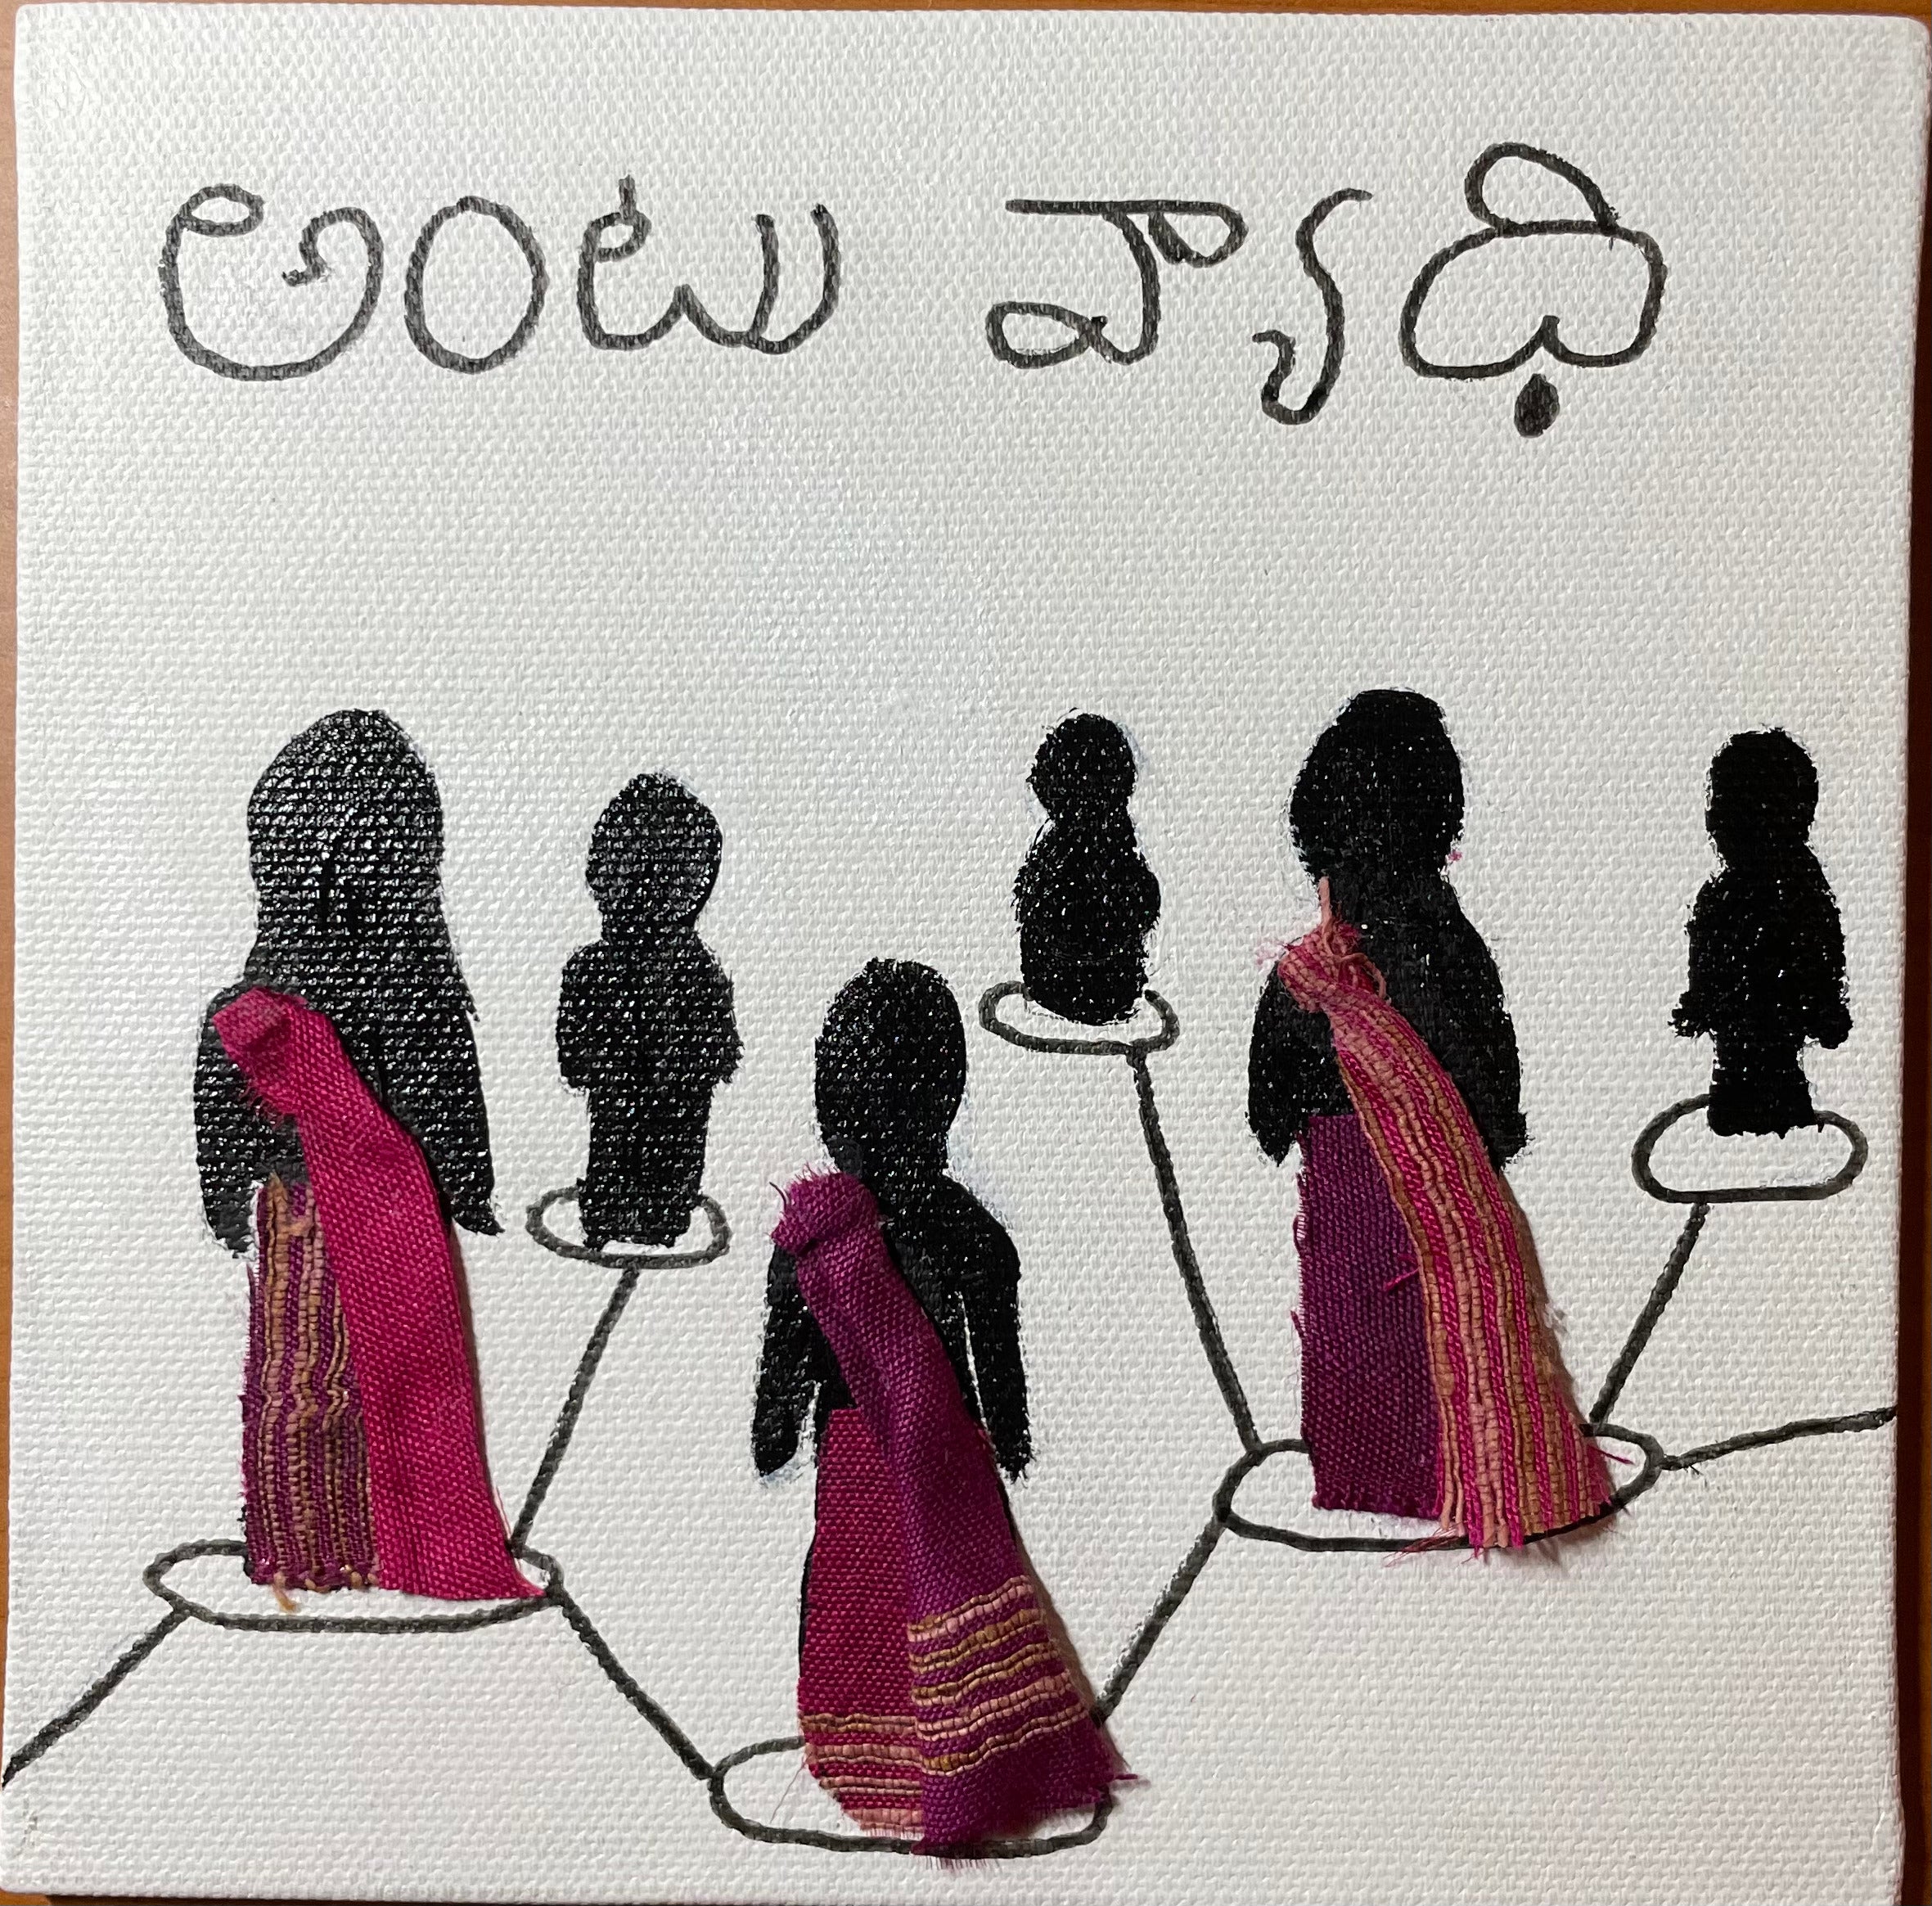 Visual representation of a network of people. There are three women, linked to each other, and each of them is also linked to a dark silhouette. The women's clothing is made of actual fabric. On top of the image, there is a caption in Telugu